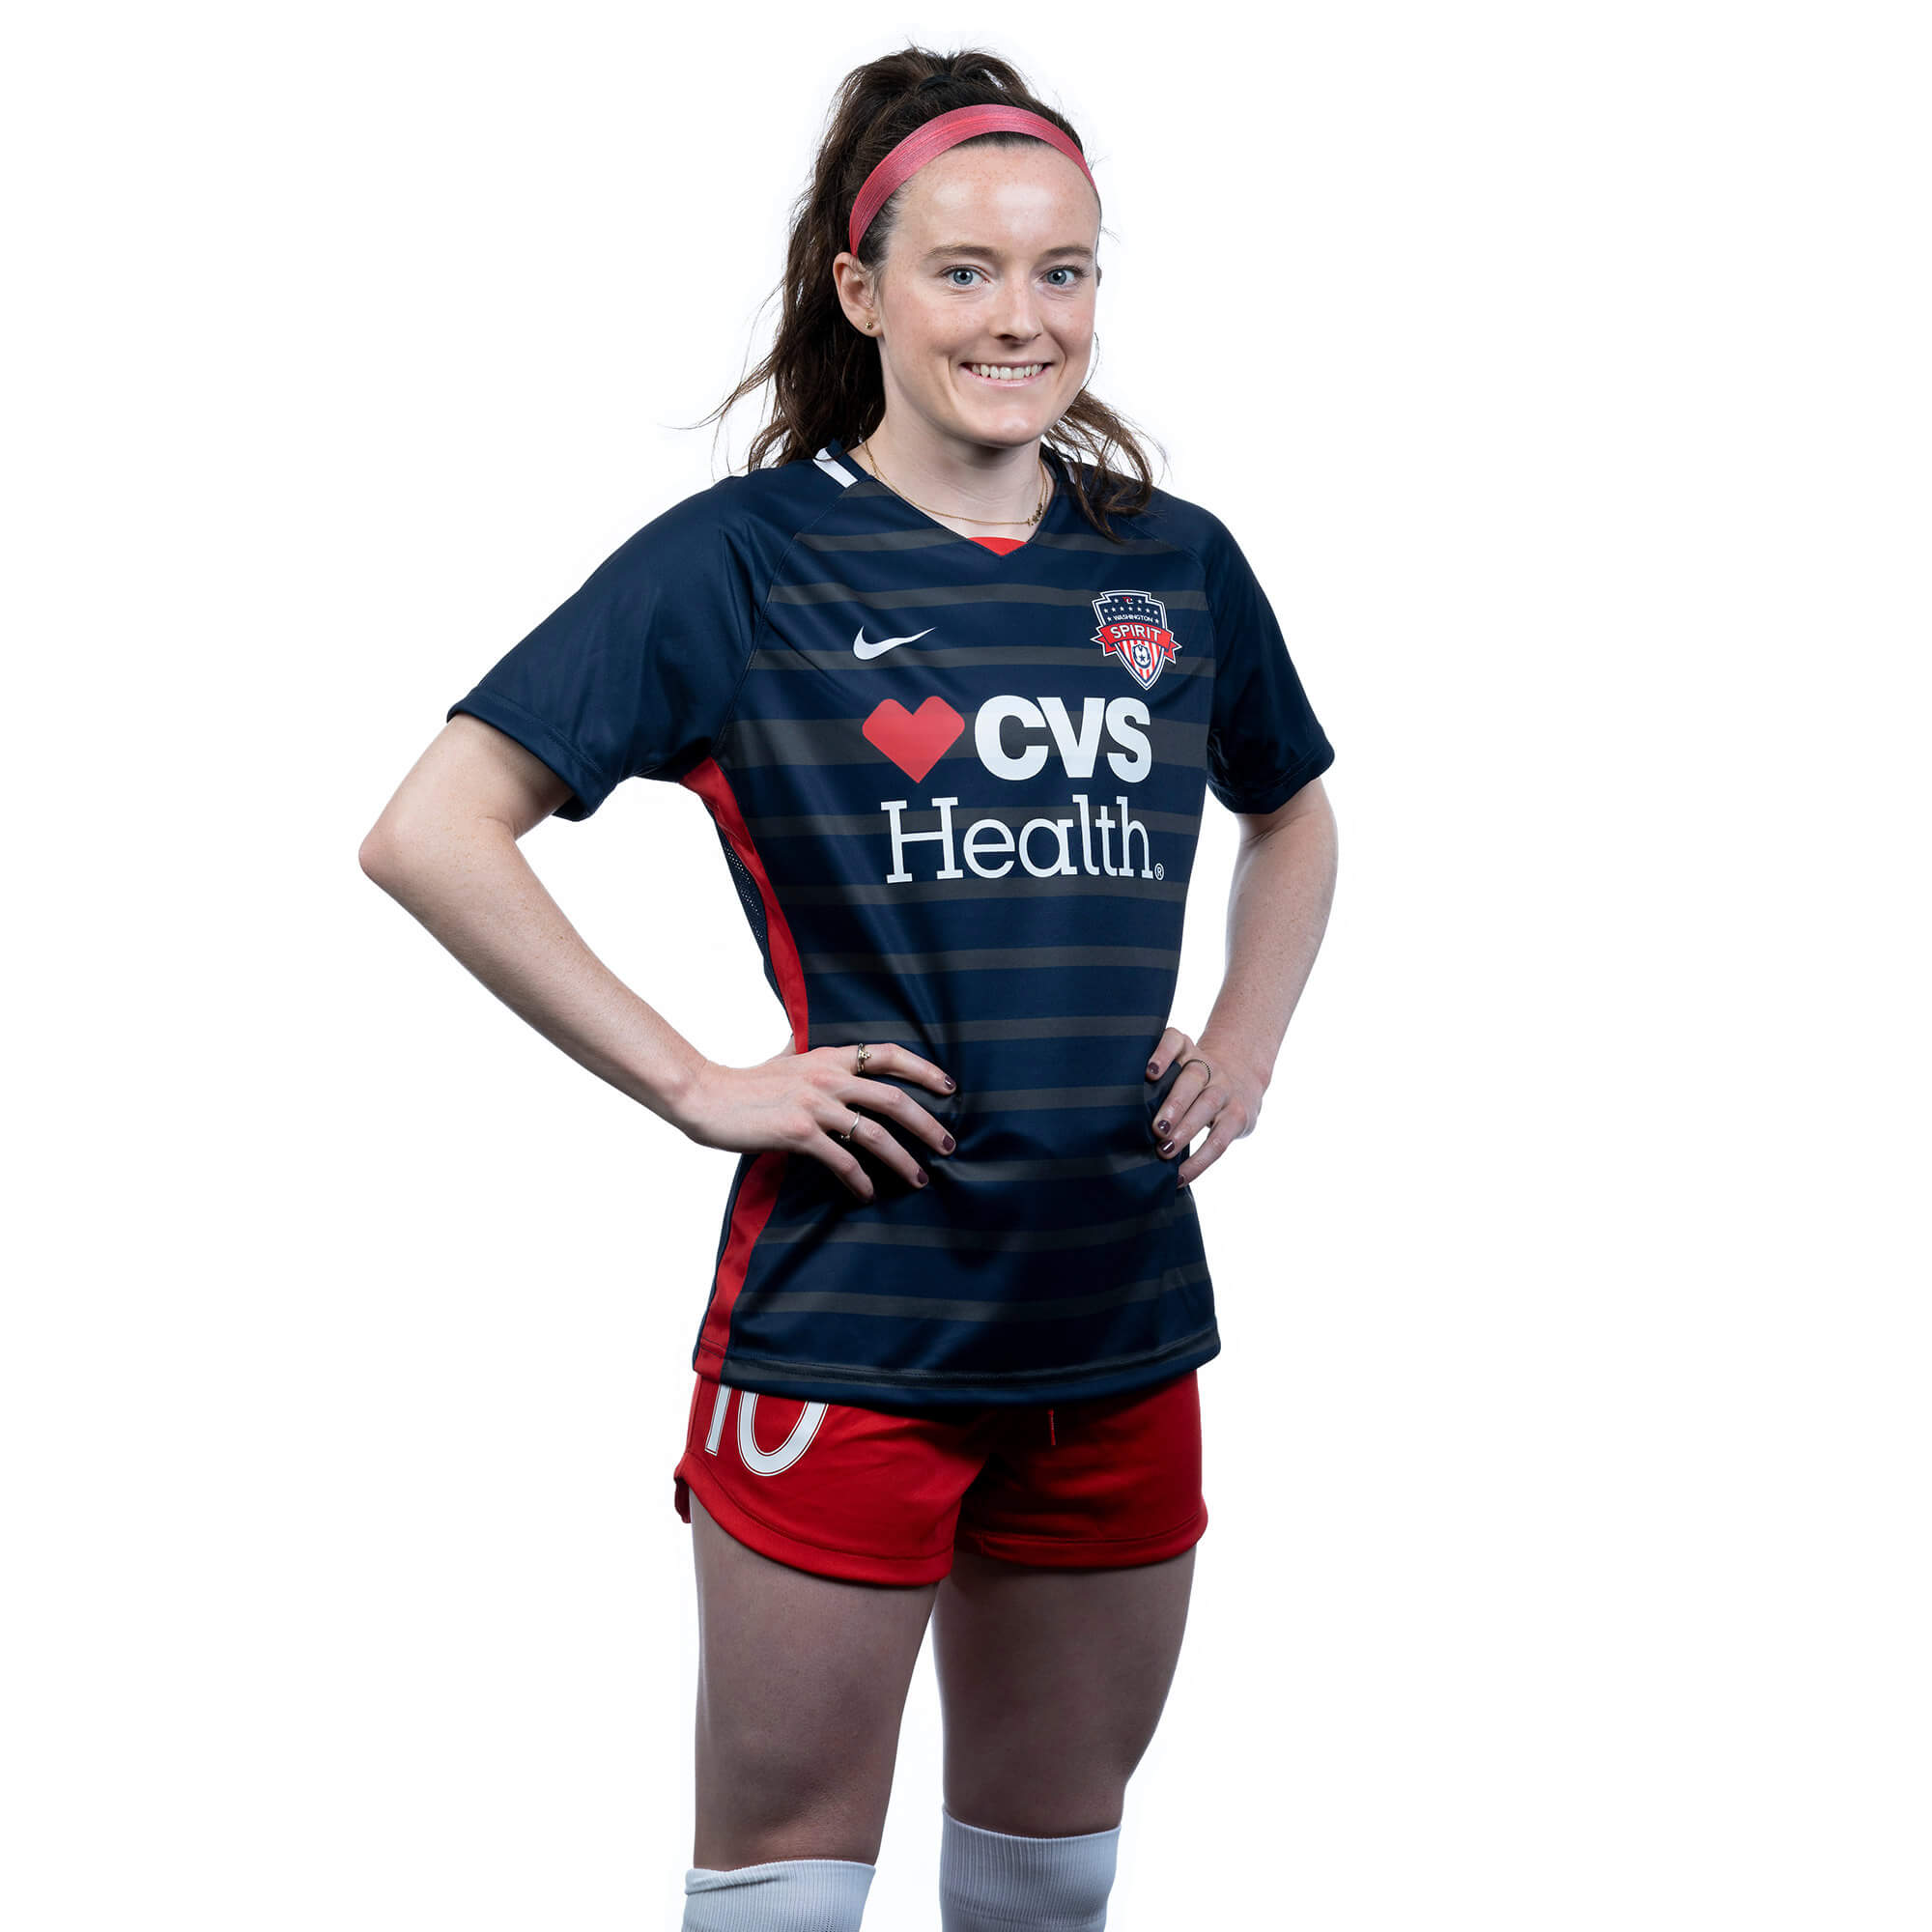 An unknown female player on the Washington Spirit (professional soccer team) models and wears the new team uniforms, which feature a CVS Health logo as part of CVS' sponsorship.